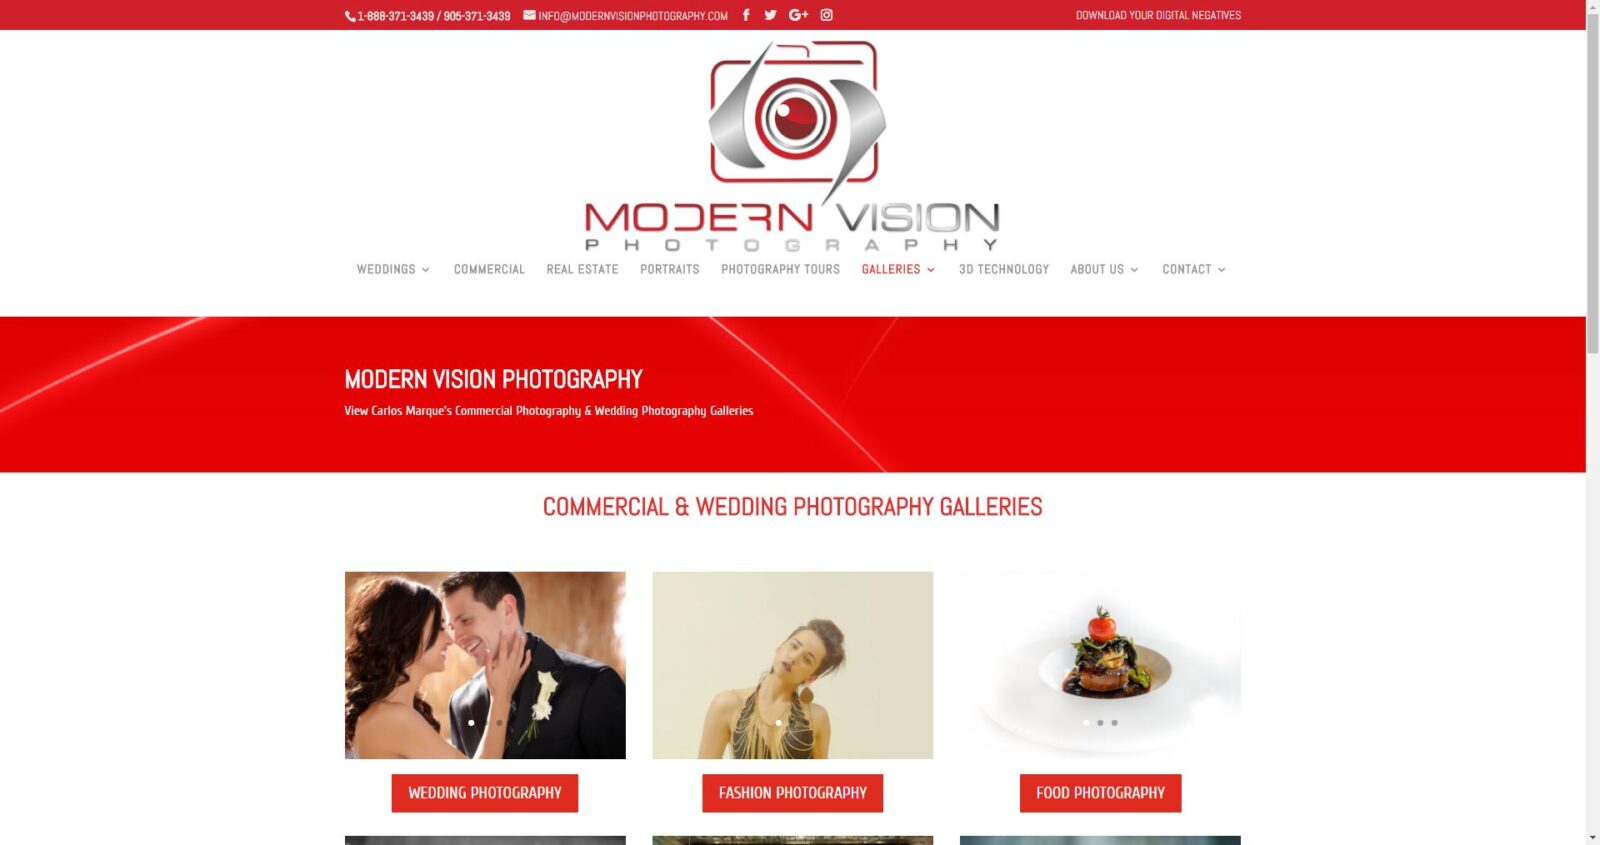 Modern Vision Photography